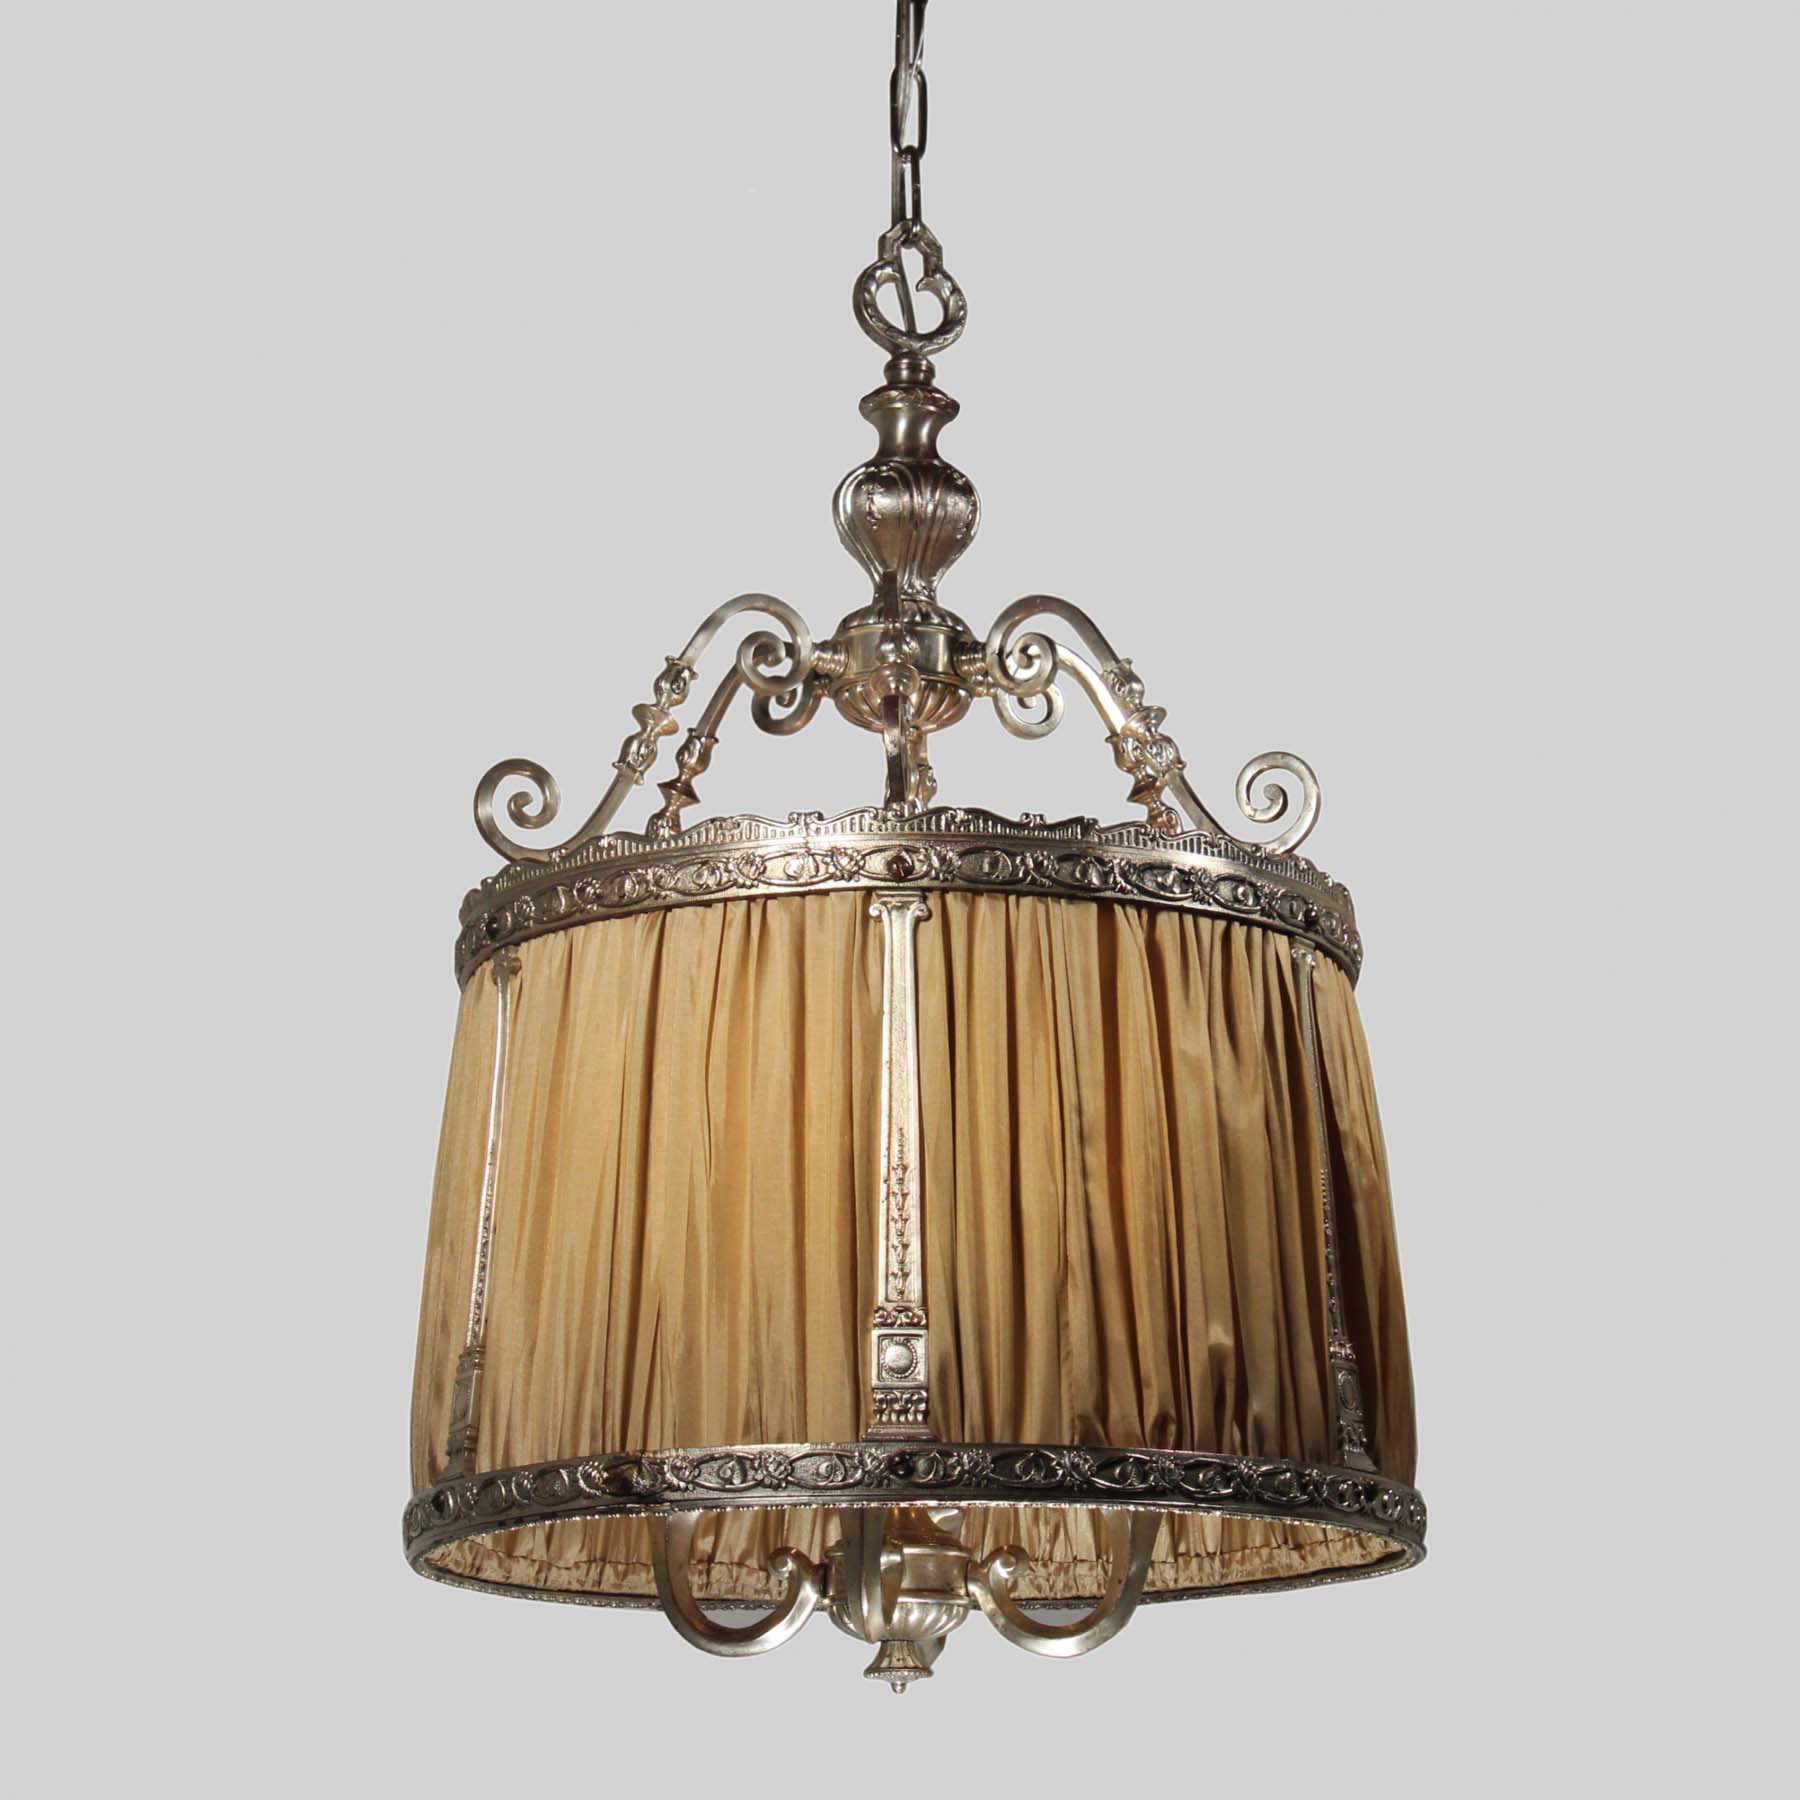 SOLD Antique Neoclassical Pendant Light, Silver Plate-67861